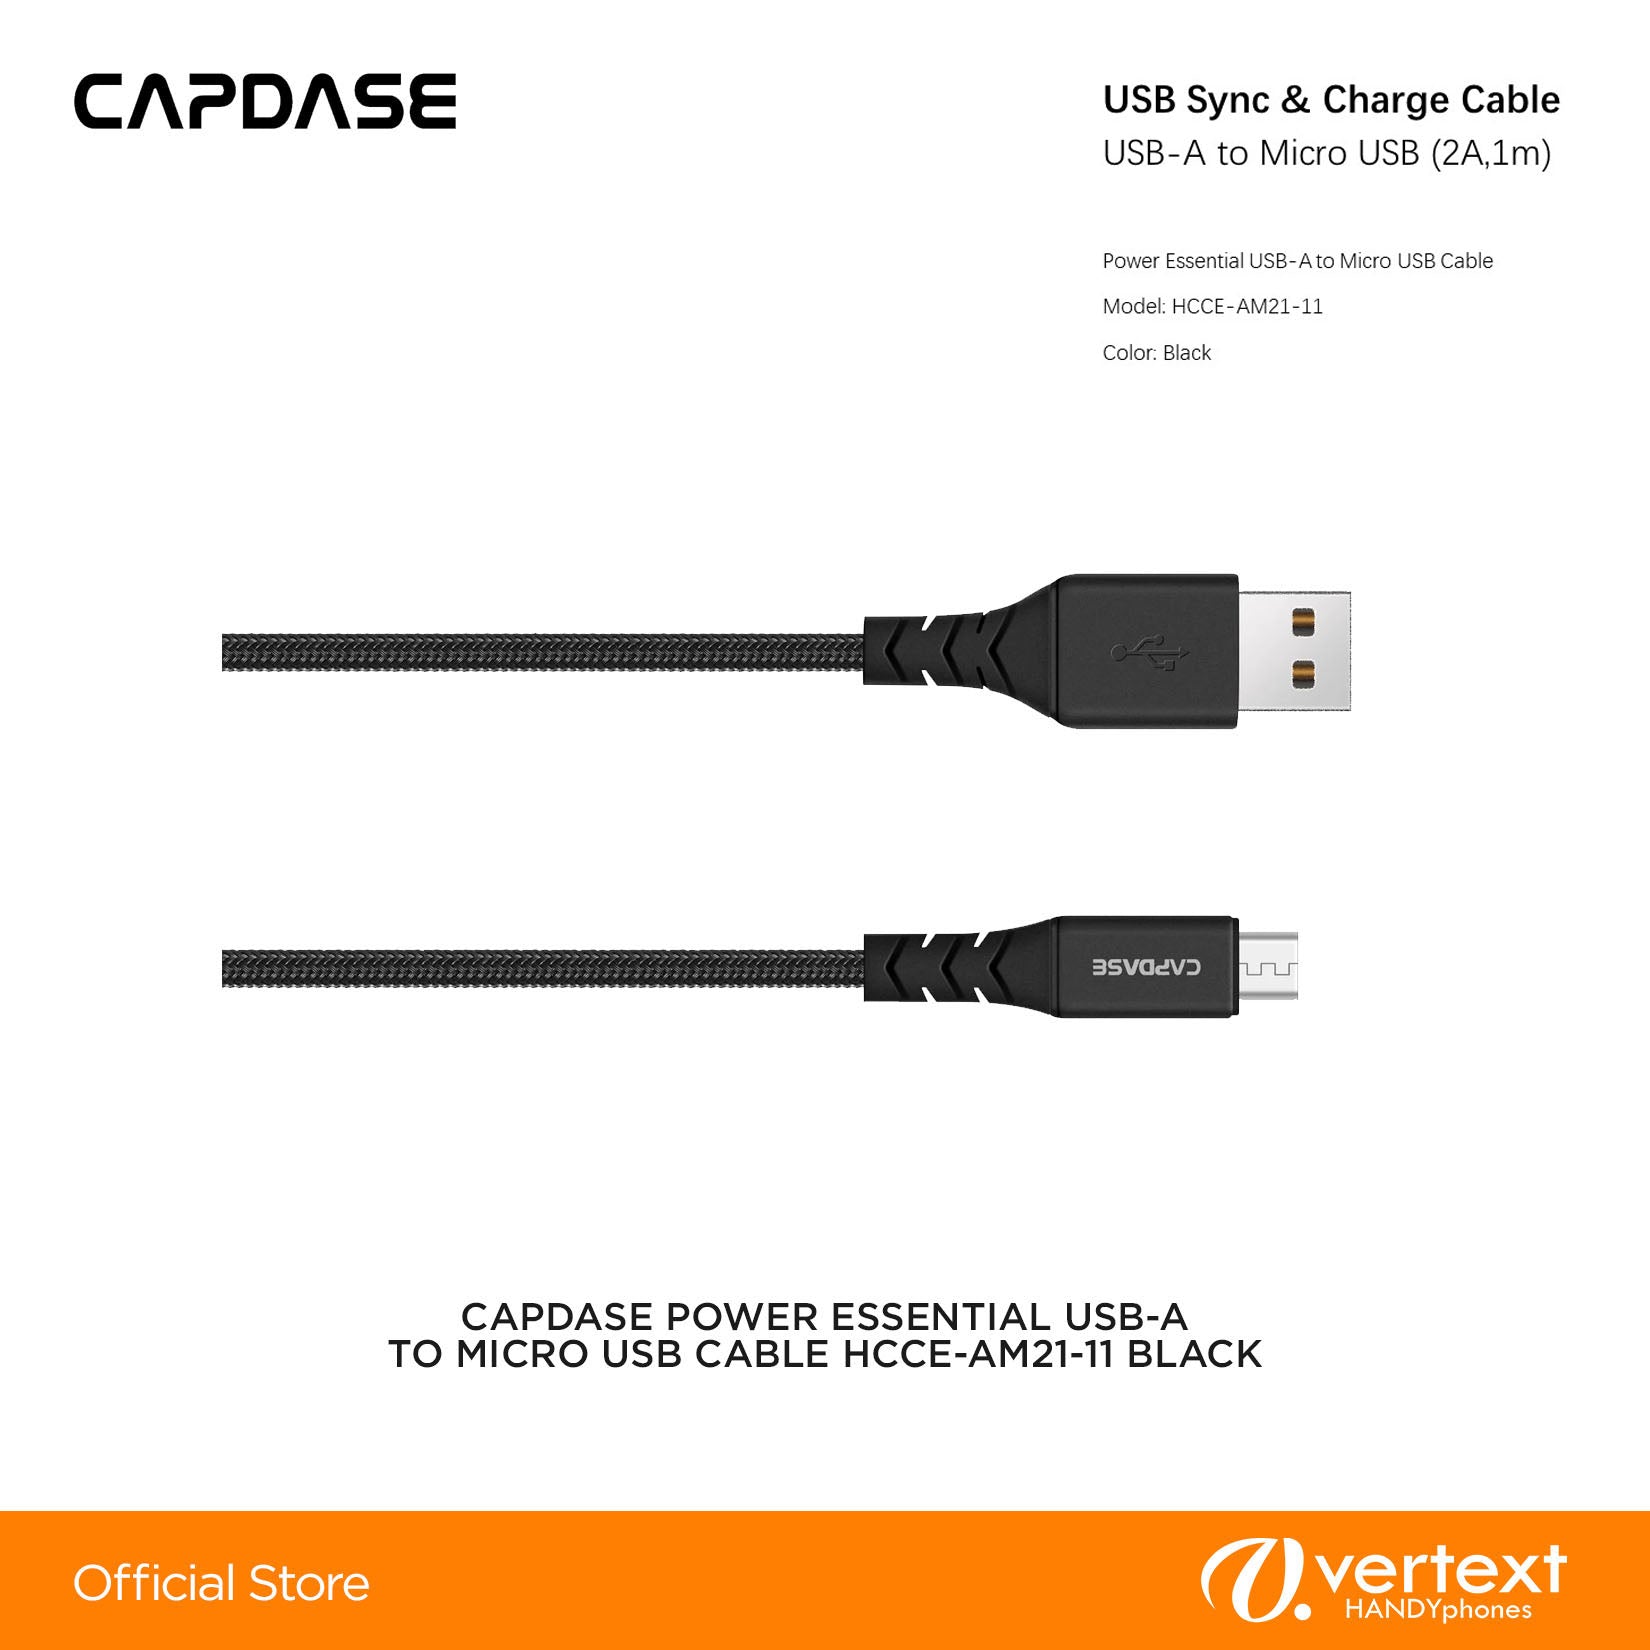 Capdase POWER ESSENTIAL USB-A TO MICRO USB CABLE HCCE-AM21-11